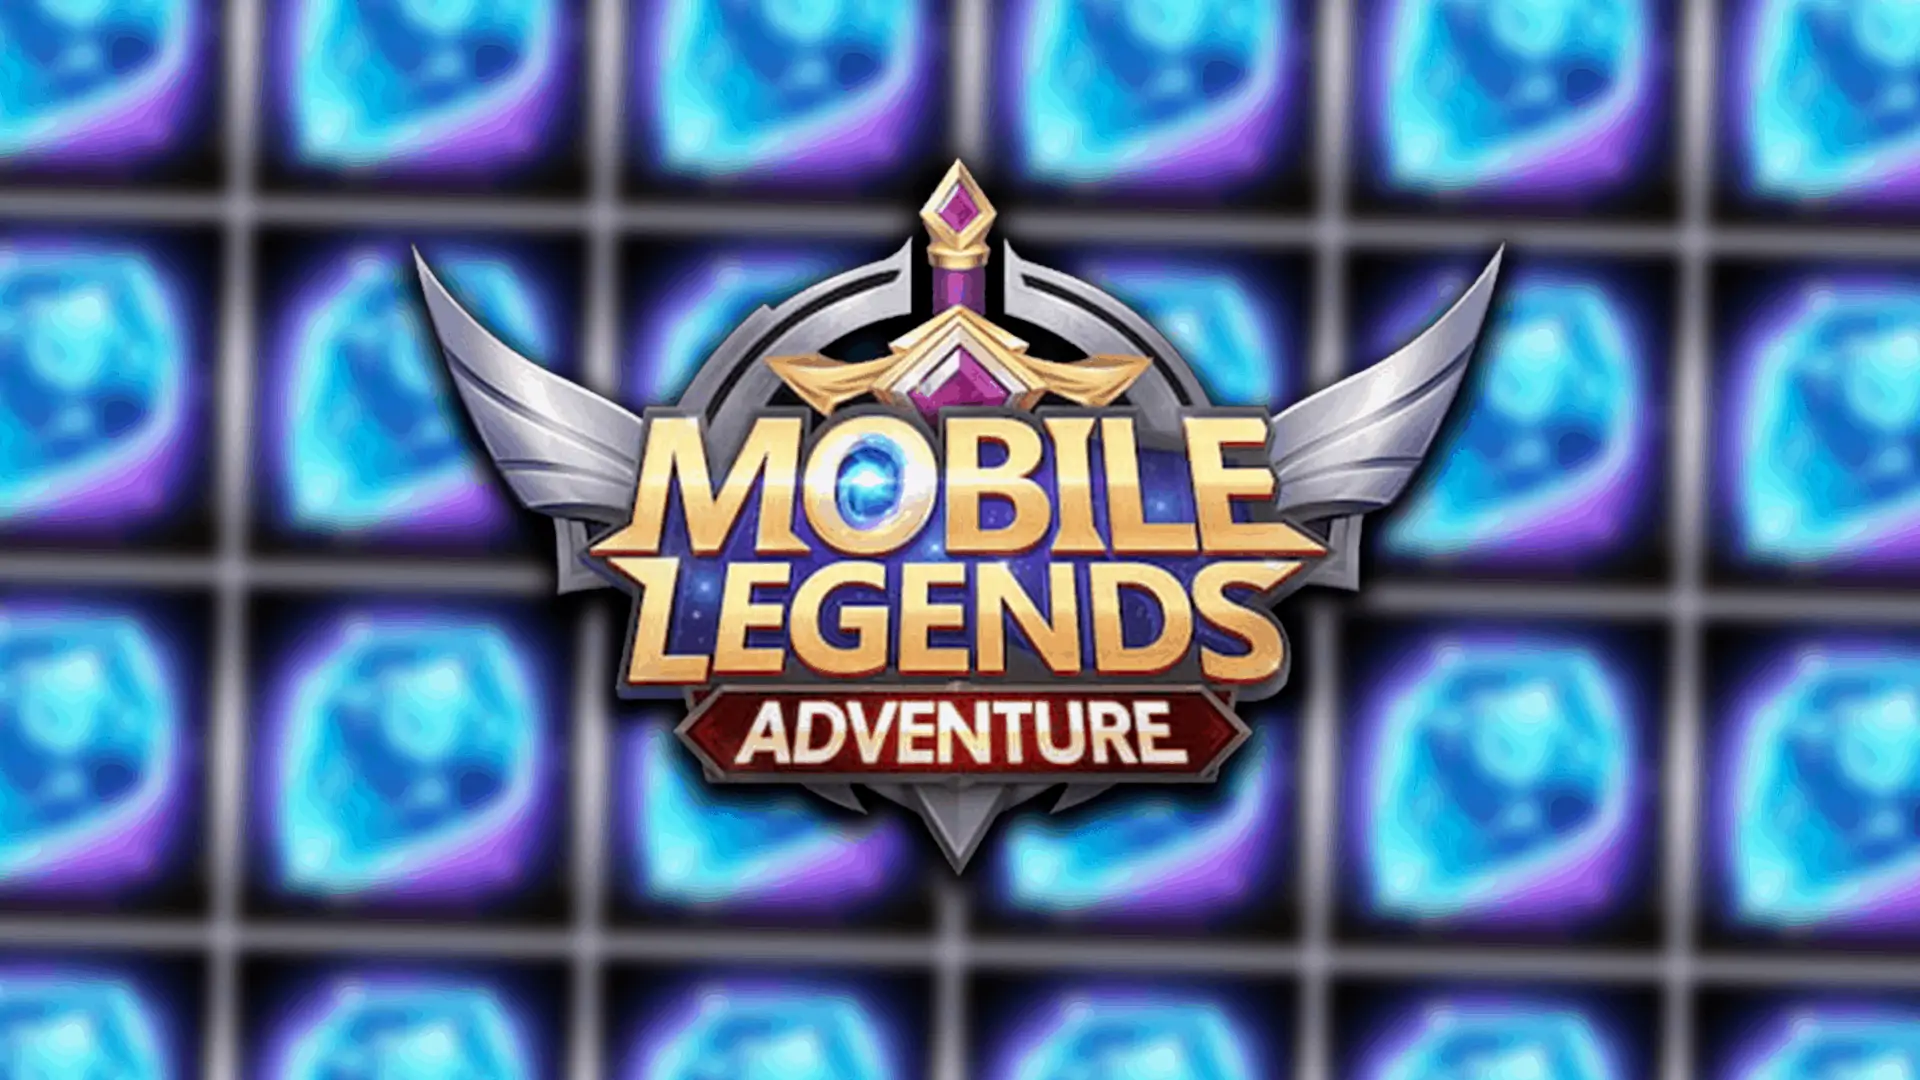 You are currently viewing Mobile Legends: Adventure – How To Get Skill Stone